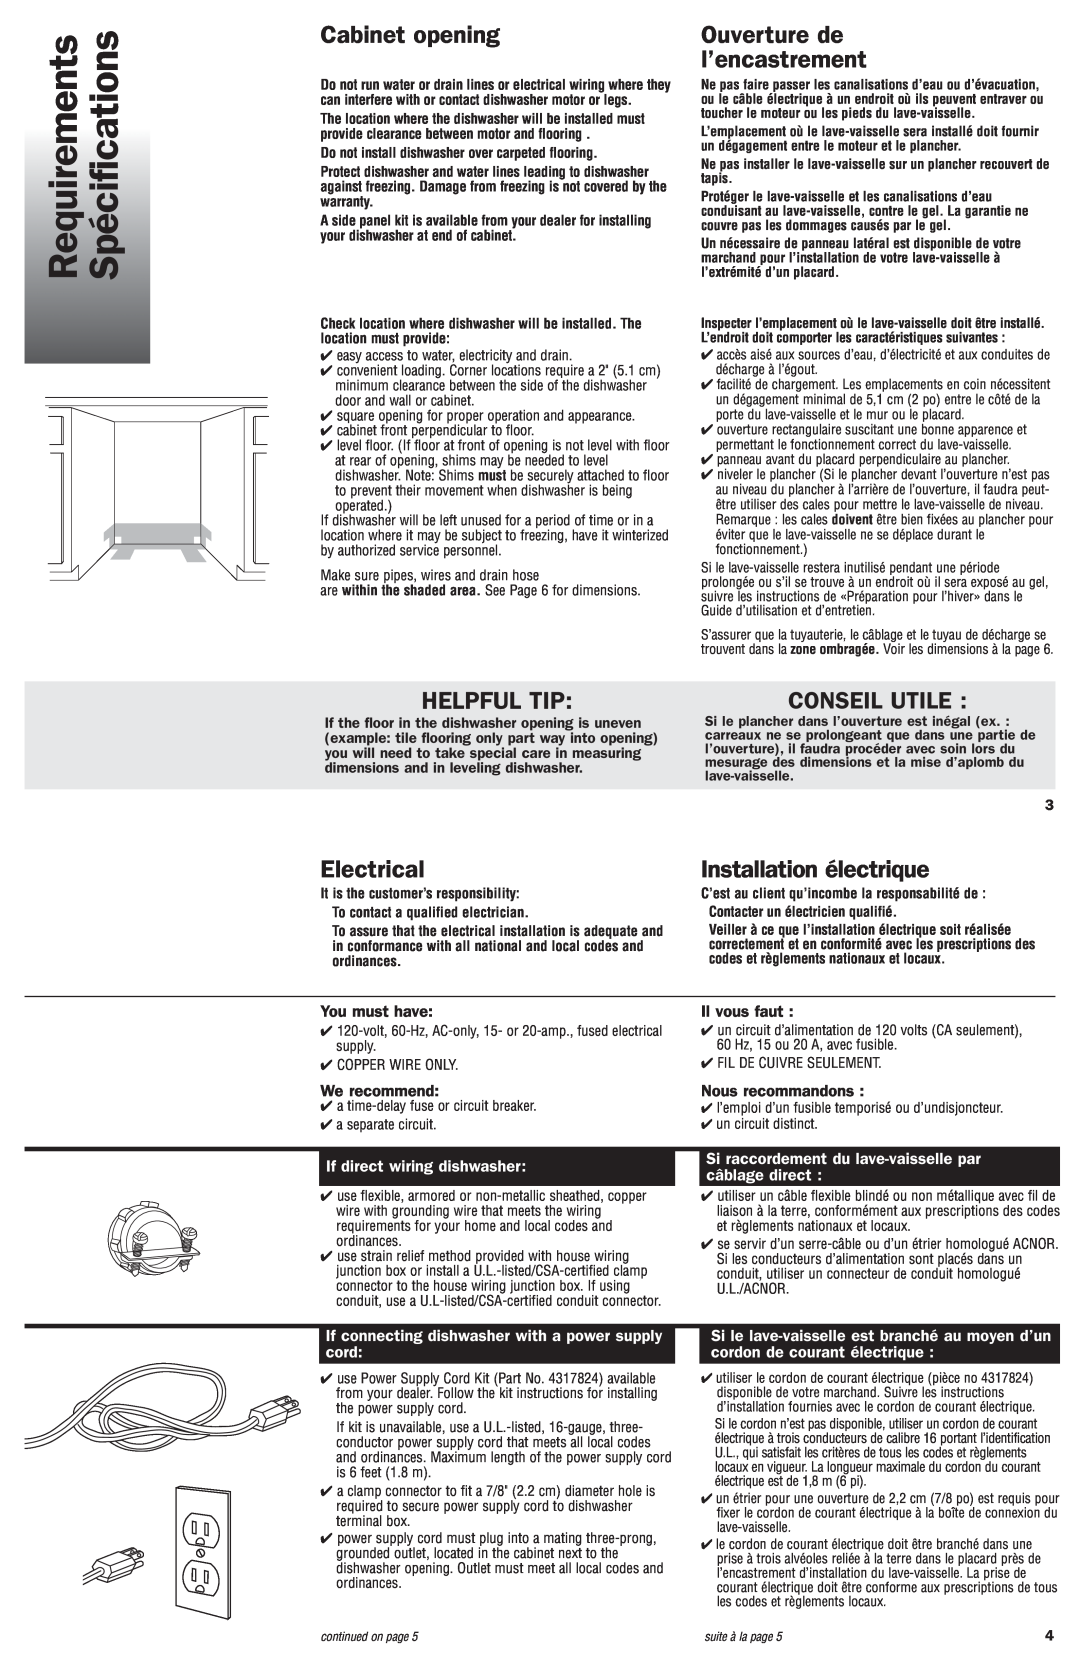 Maytag 8269550 Requirements, Spécifications, Cabinet opening, Ouverture de l’encastrement, Helpful Tip, Electrical 